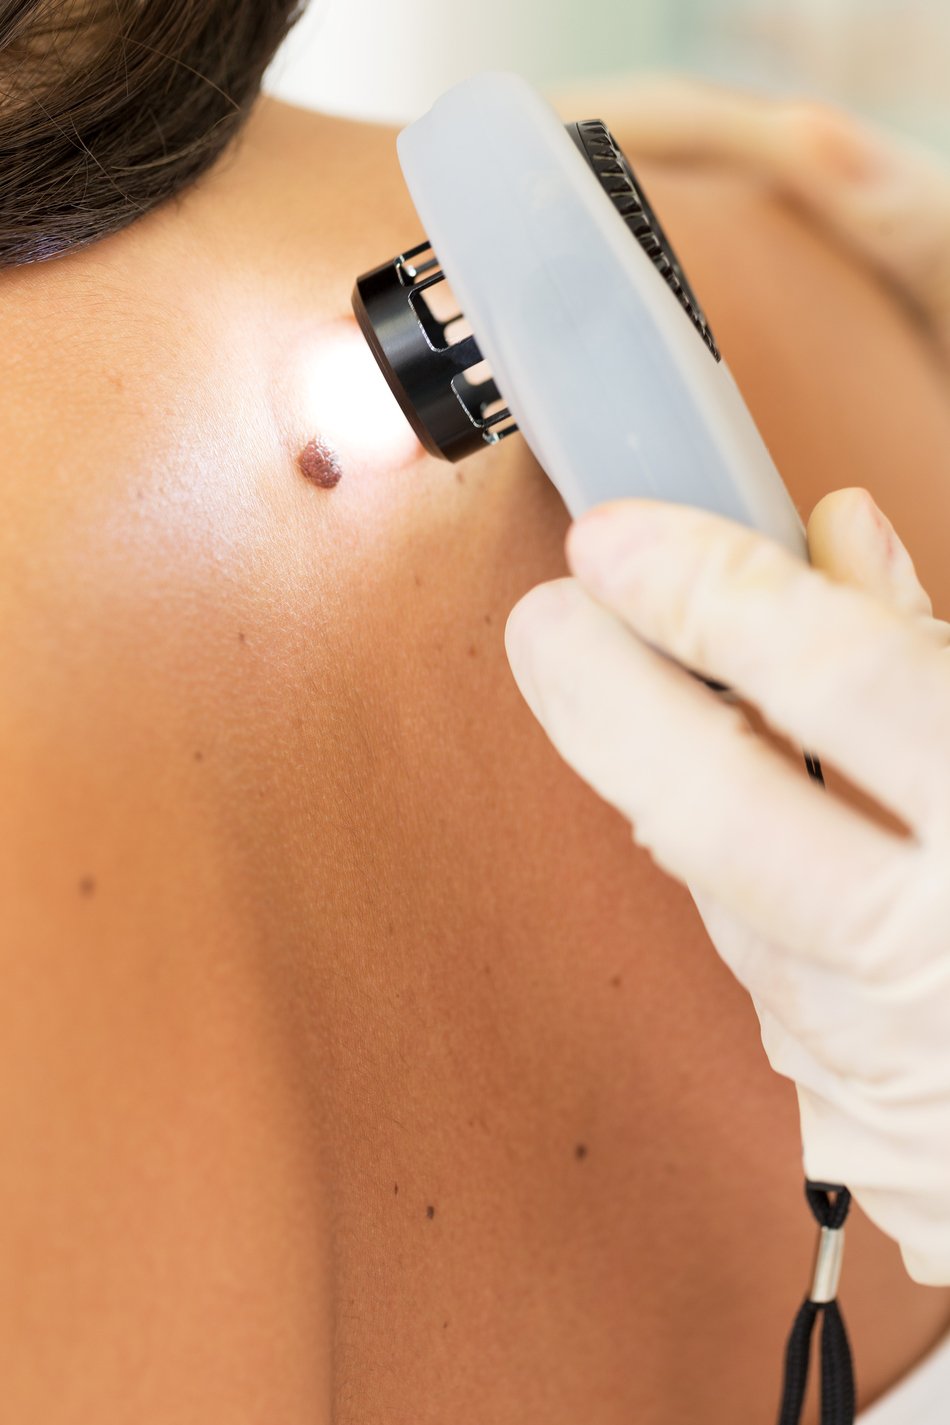 How Dangerous is Skin Cancer, Really?